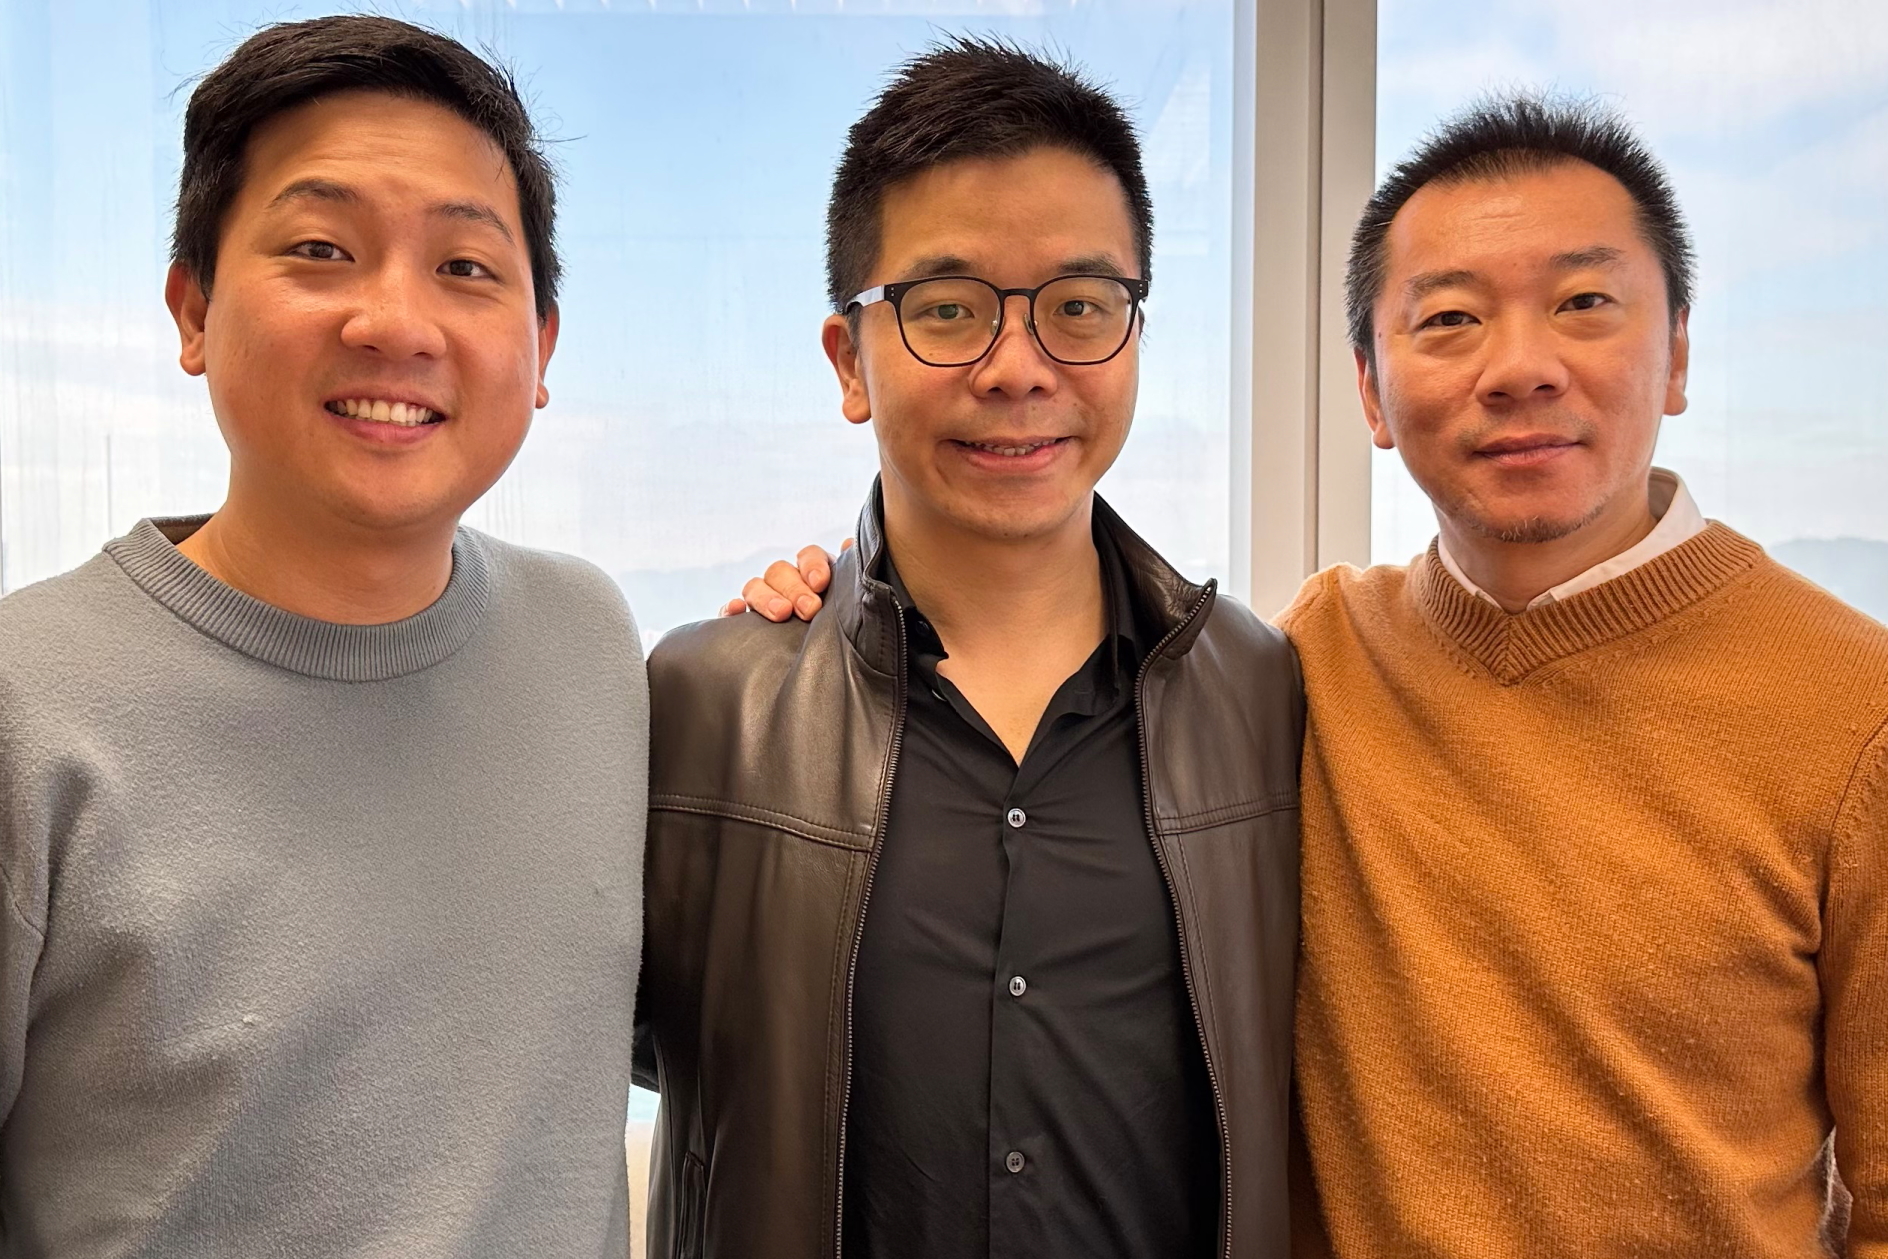 From left: Kenneth Lee, Co-founder & CPO of Freed Group; Eric Lau, General Manager of Connexus Travel; and Abel Zhao, Co-founder & CEO of Freed Group. Click to enlarge.